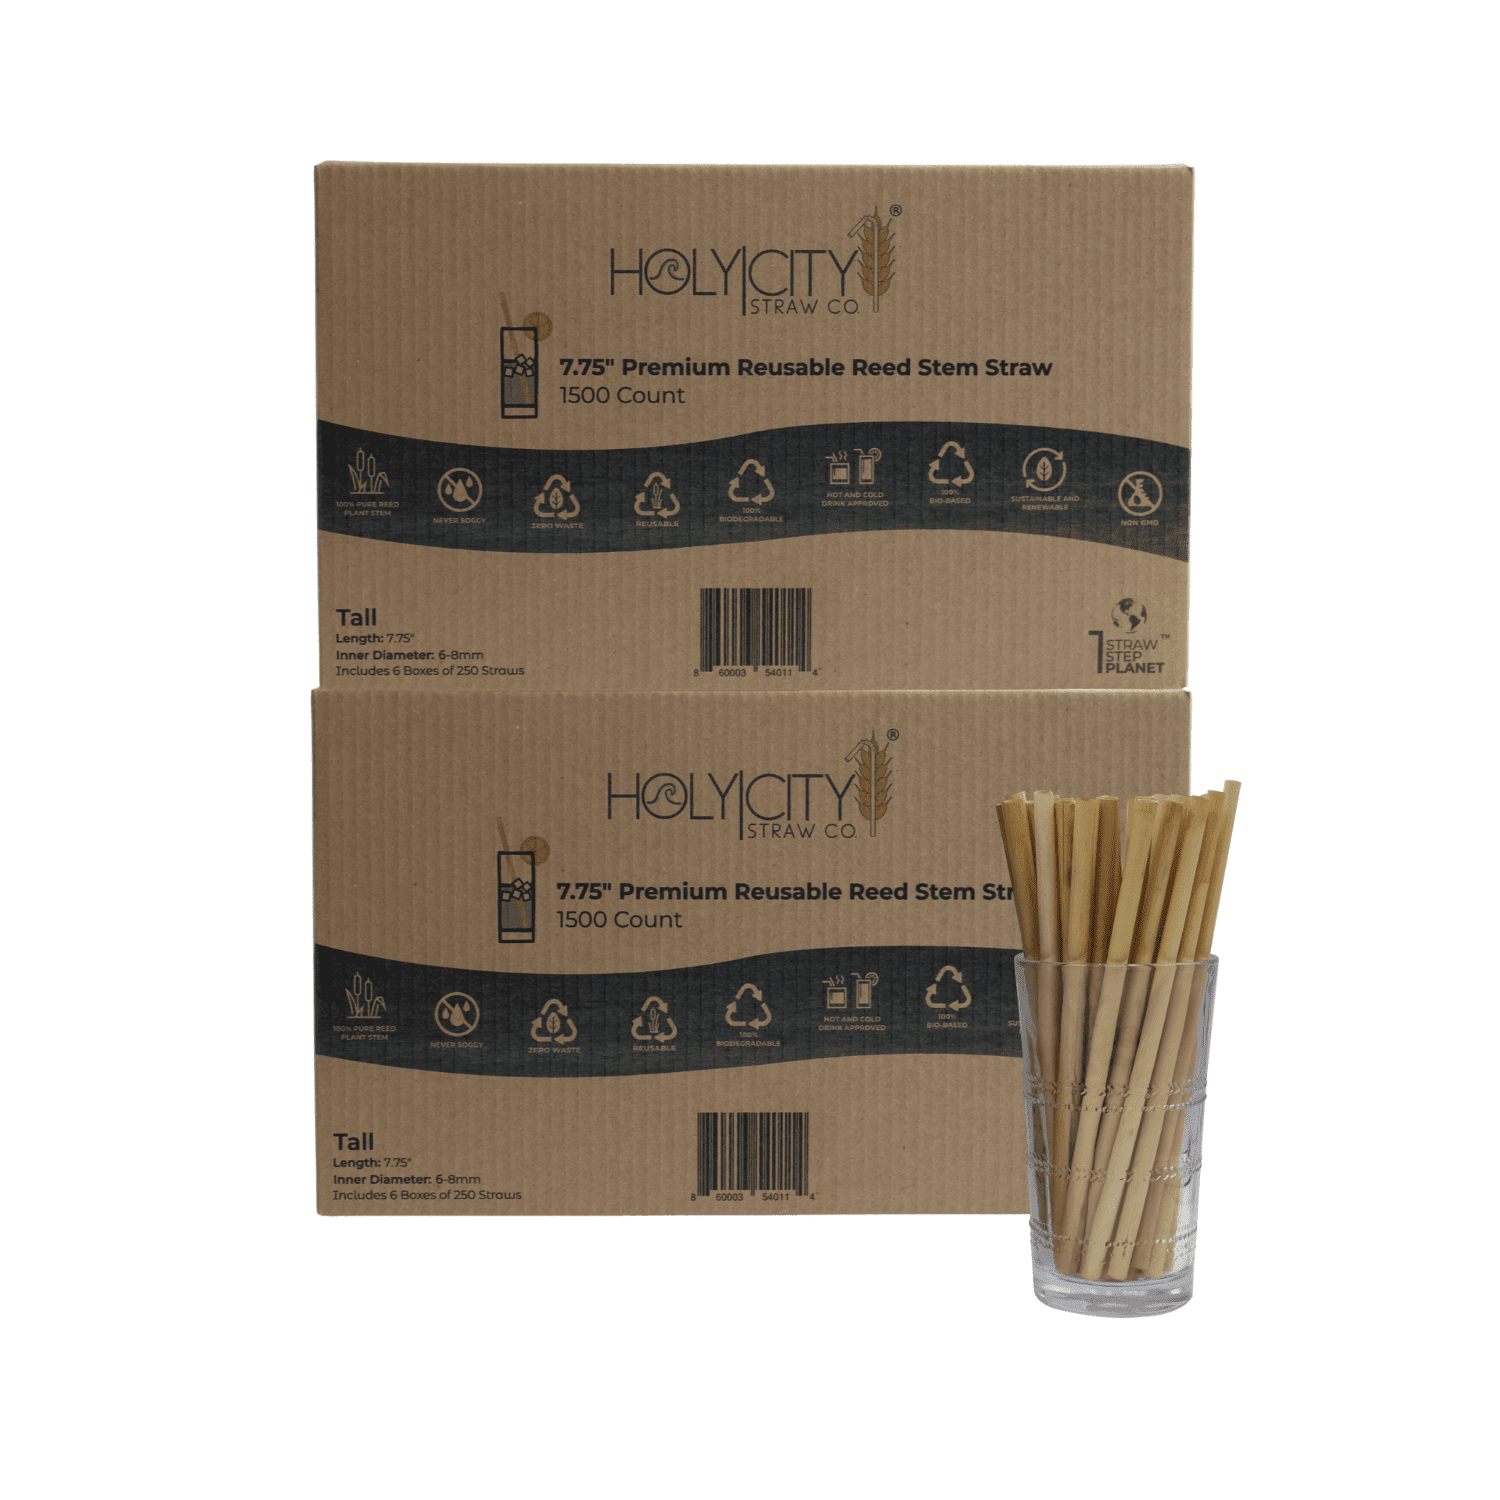 3000 count case containing 12 boxes of 250 ct boxes of Holy City tall reusable reed Straws